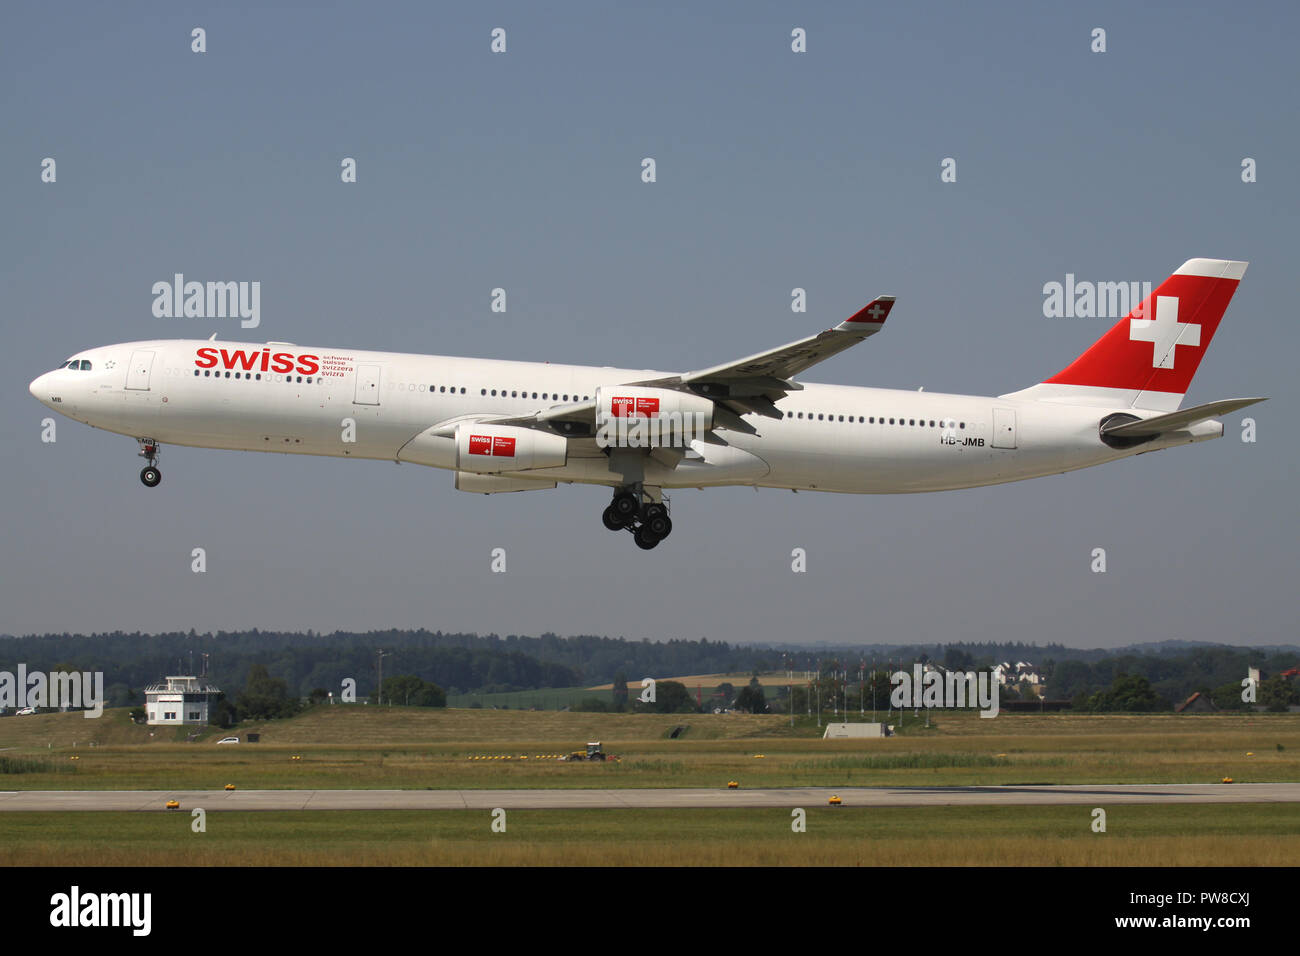 Swiss International Air Lines Airbus A340-300 (old livery) with registration HB-JMB on short final for runway 14 of Zurich Airport. Stock Photo